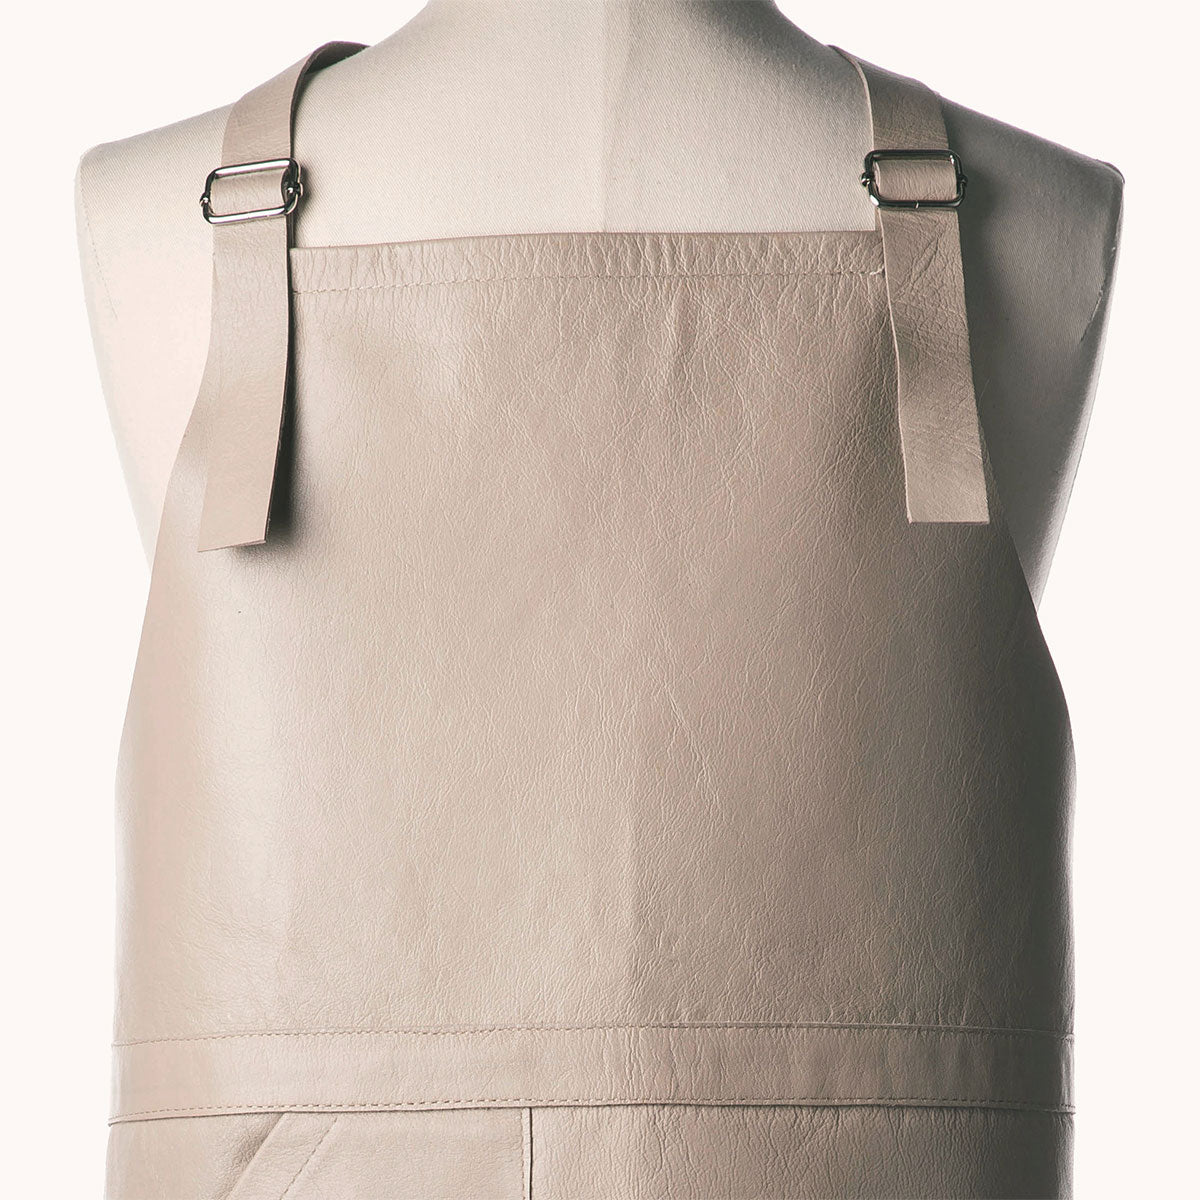 Deluxe Leather Apron (Sand)